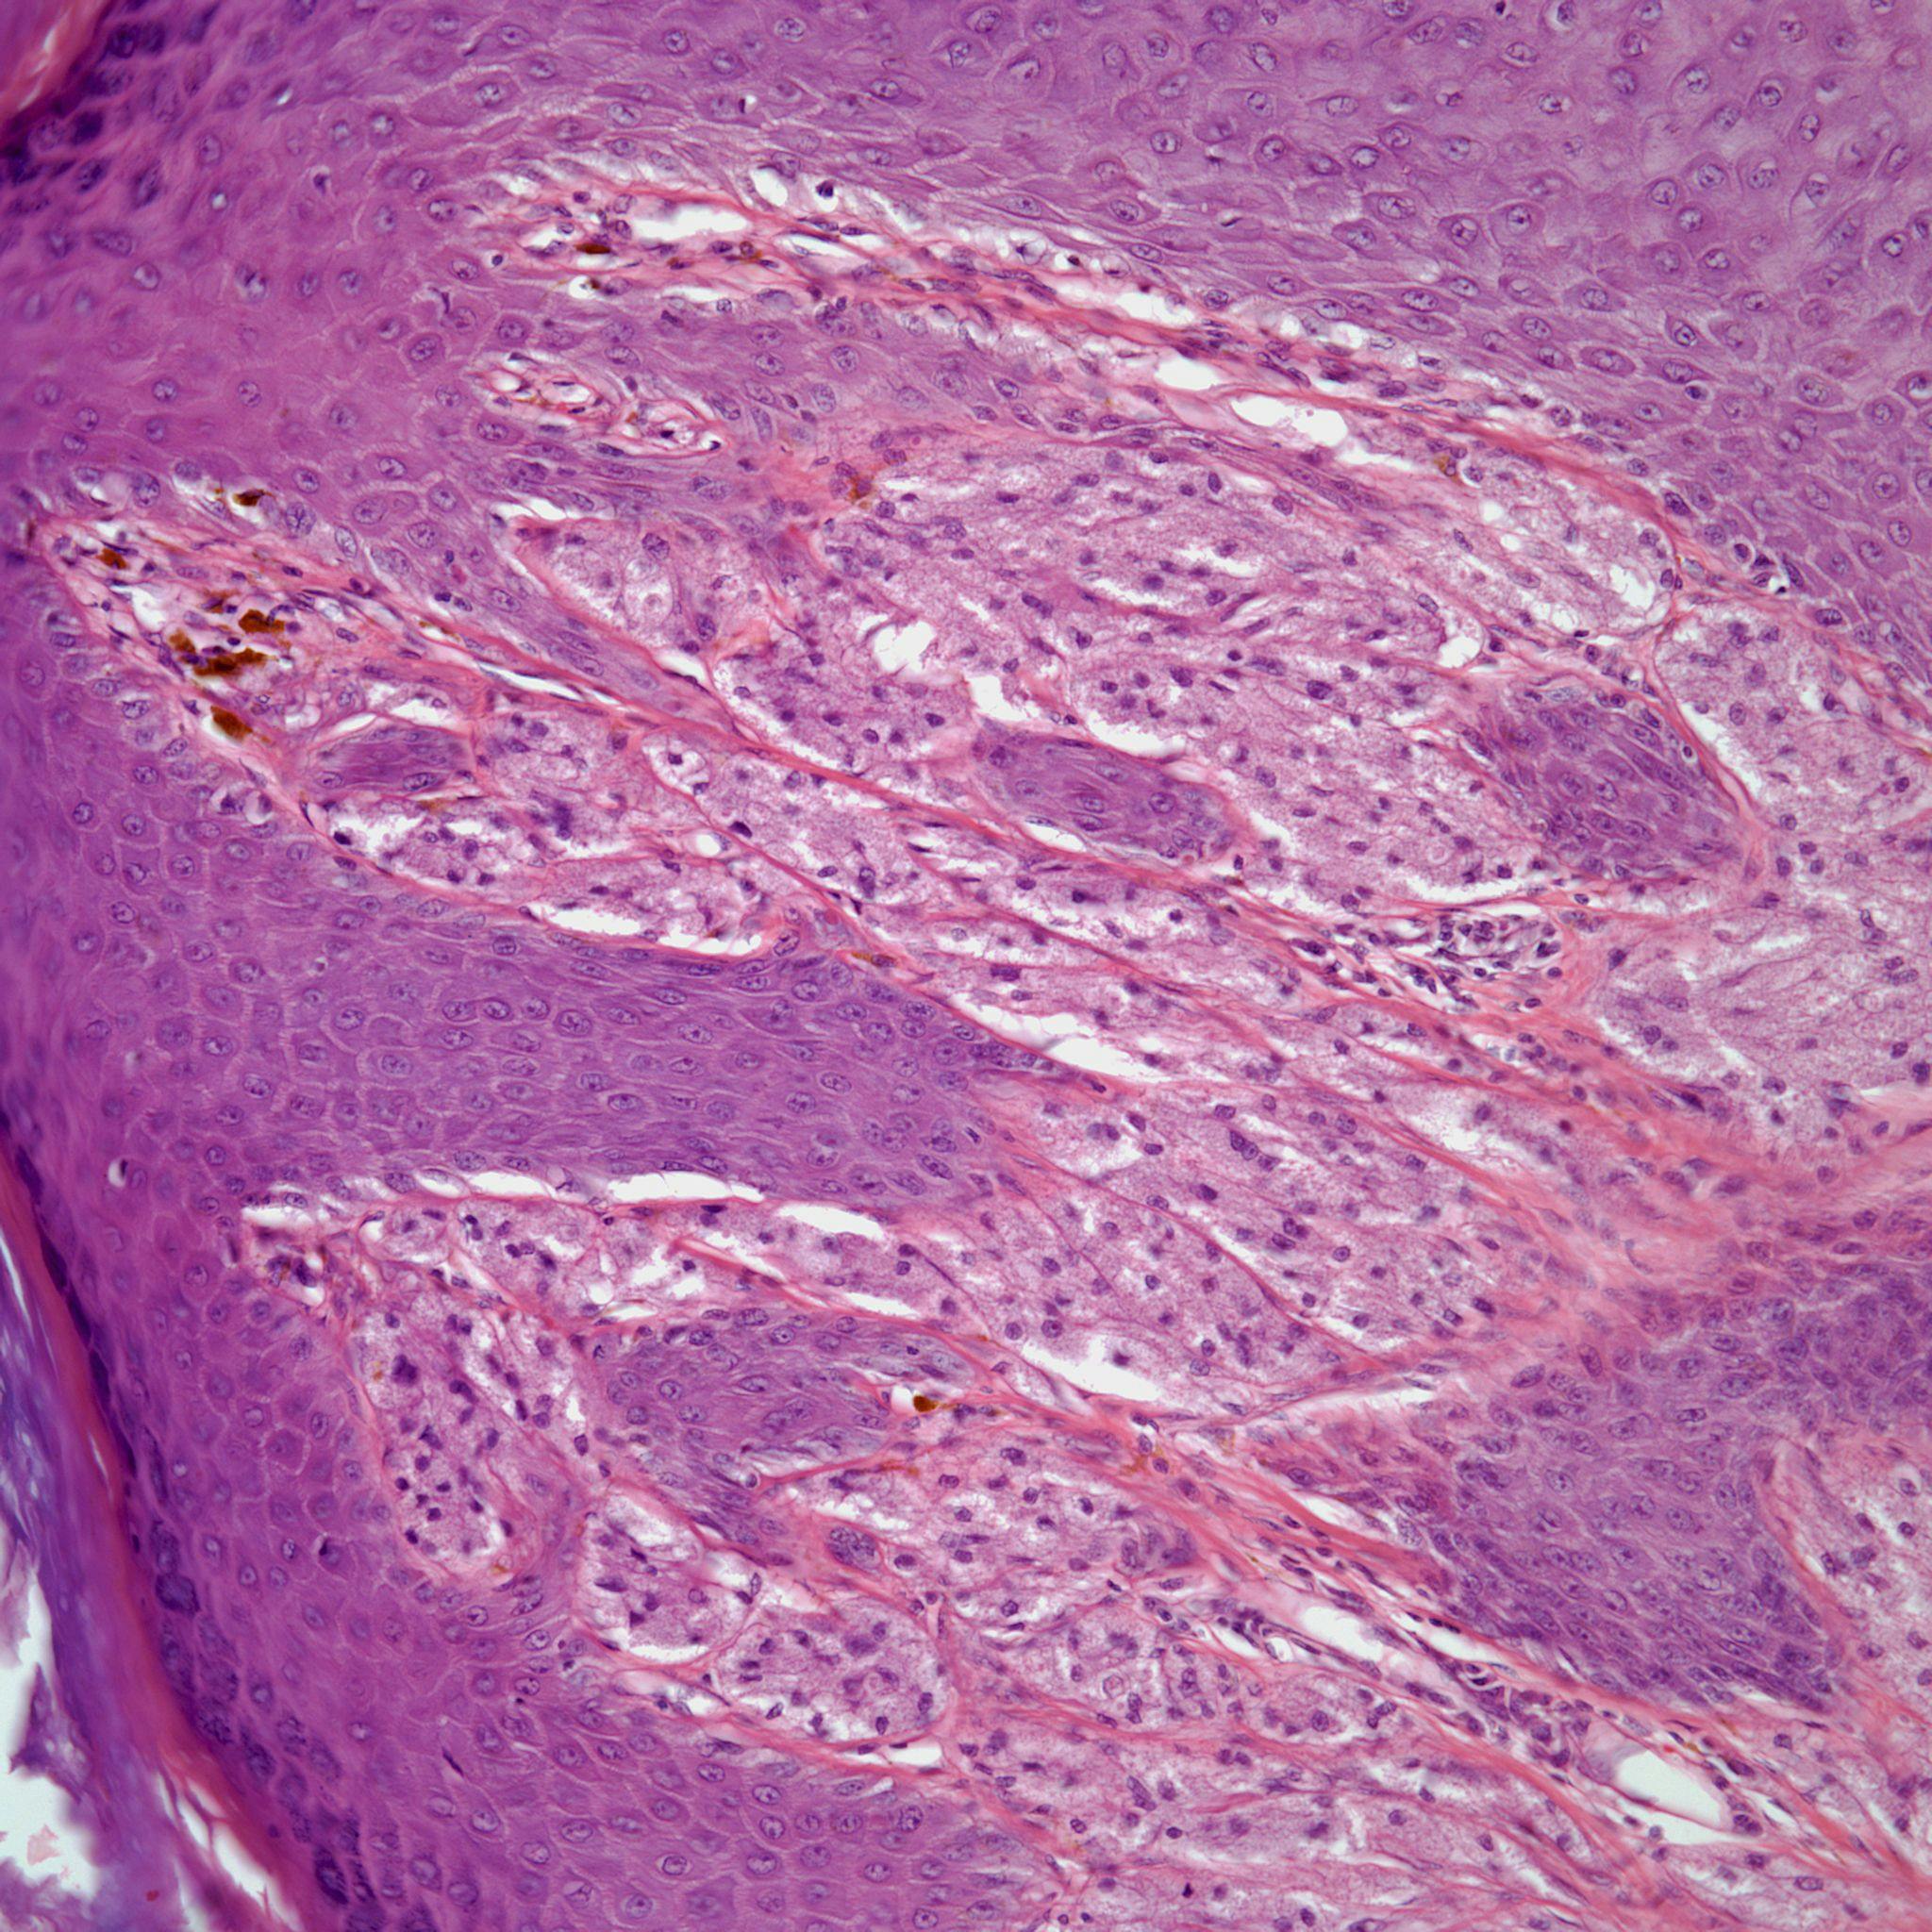 A 34-Year-Old Male With a Skin Tumor